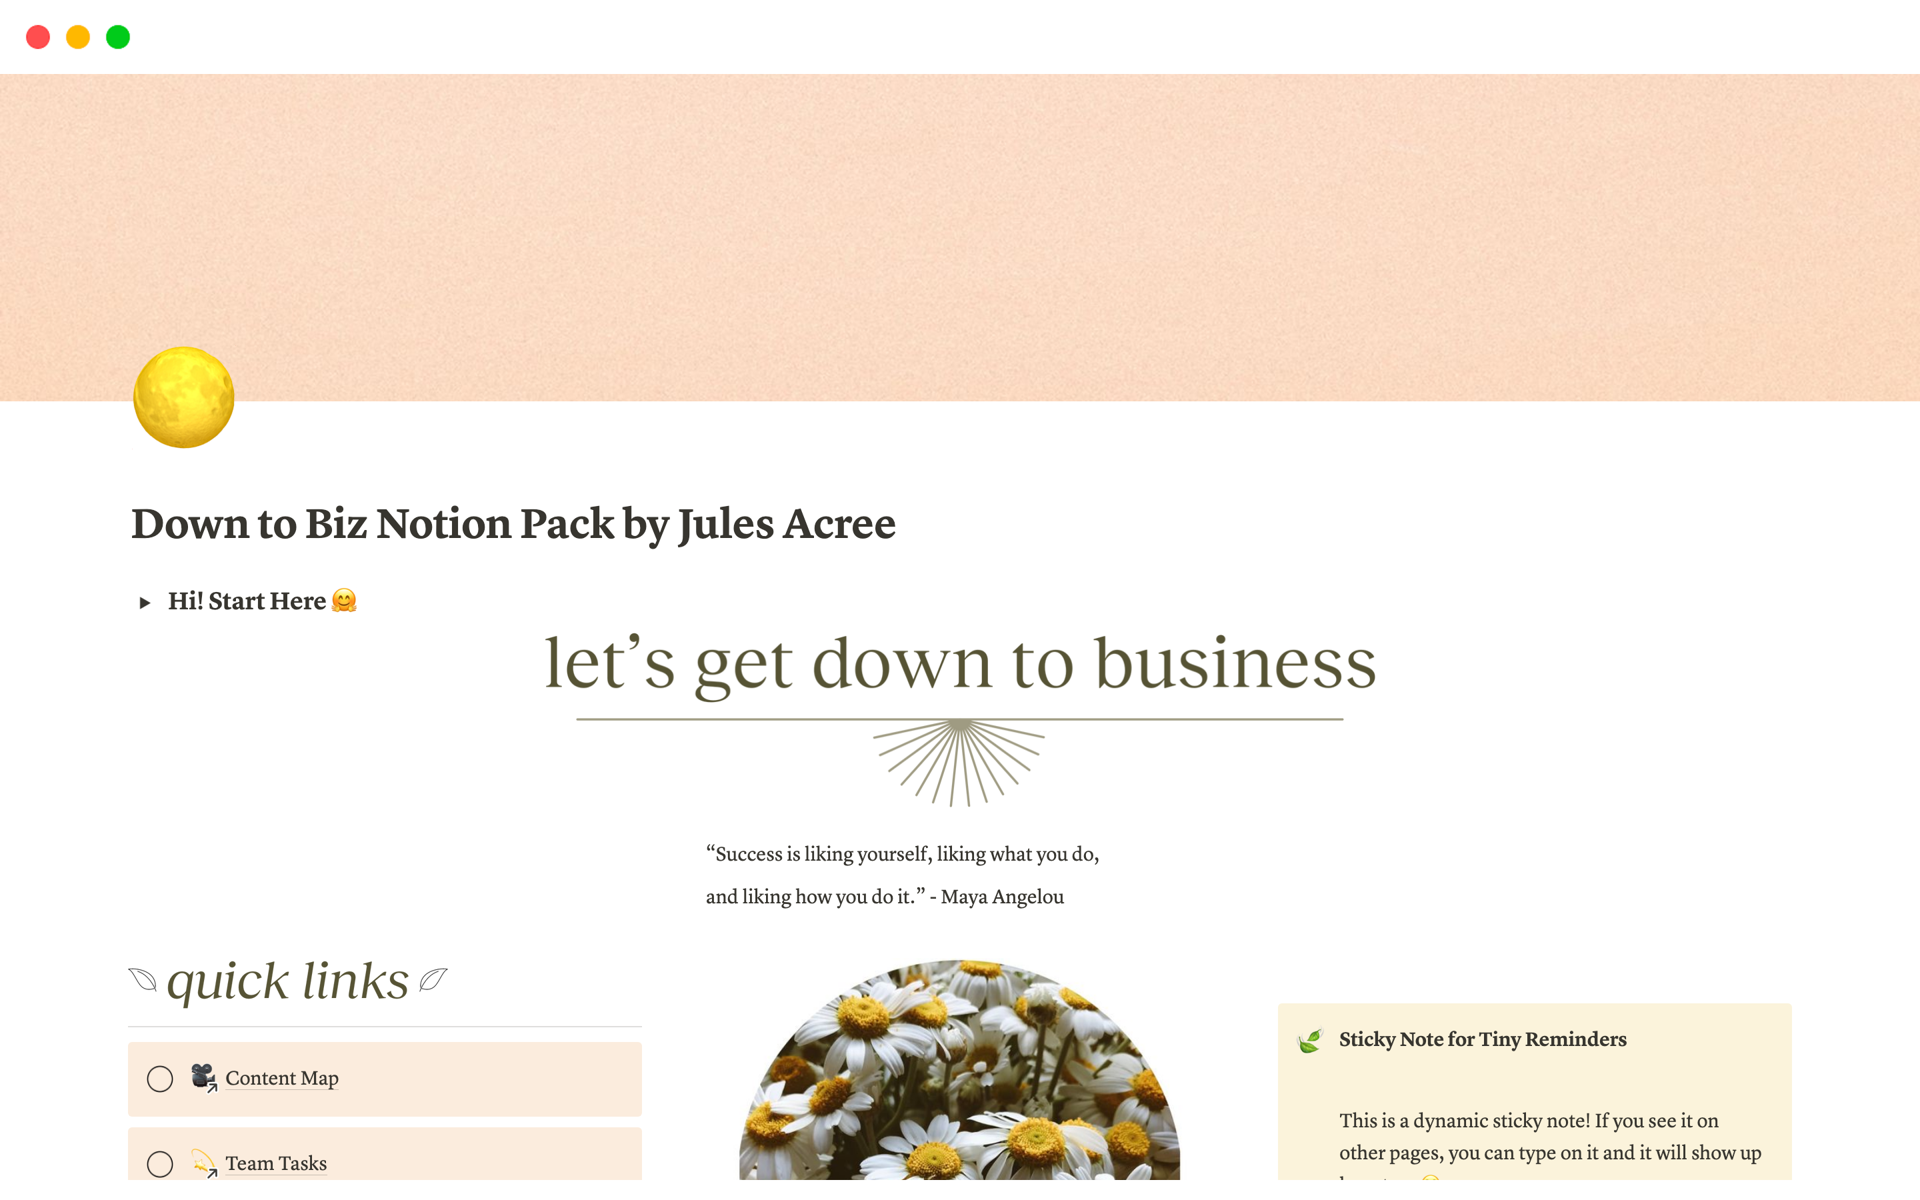 omandthecity-notion-site-down-to-biz-notion-pack-by-jules-acree-44b392dad30848af830b82a763311956-automated-desktop